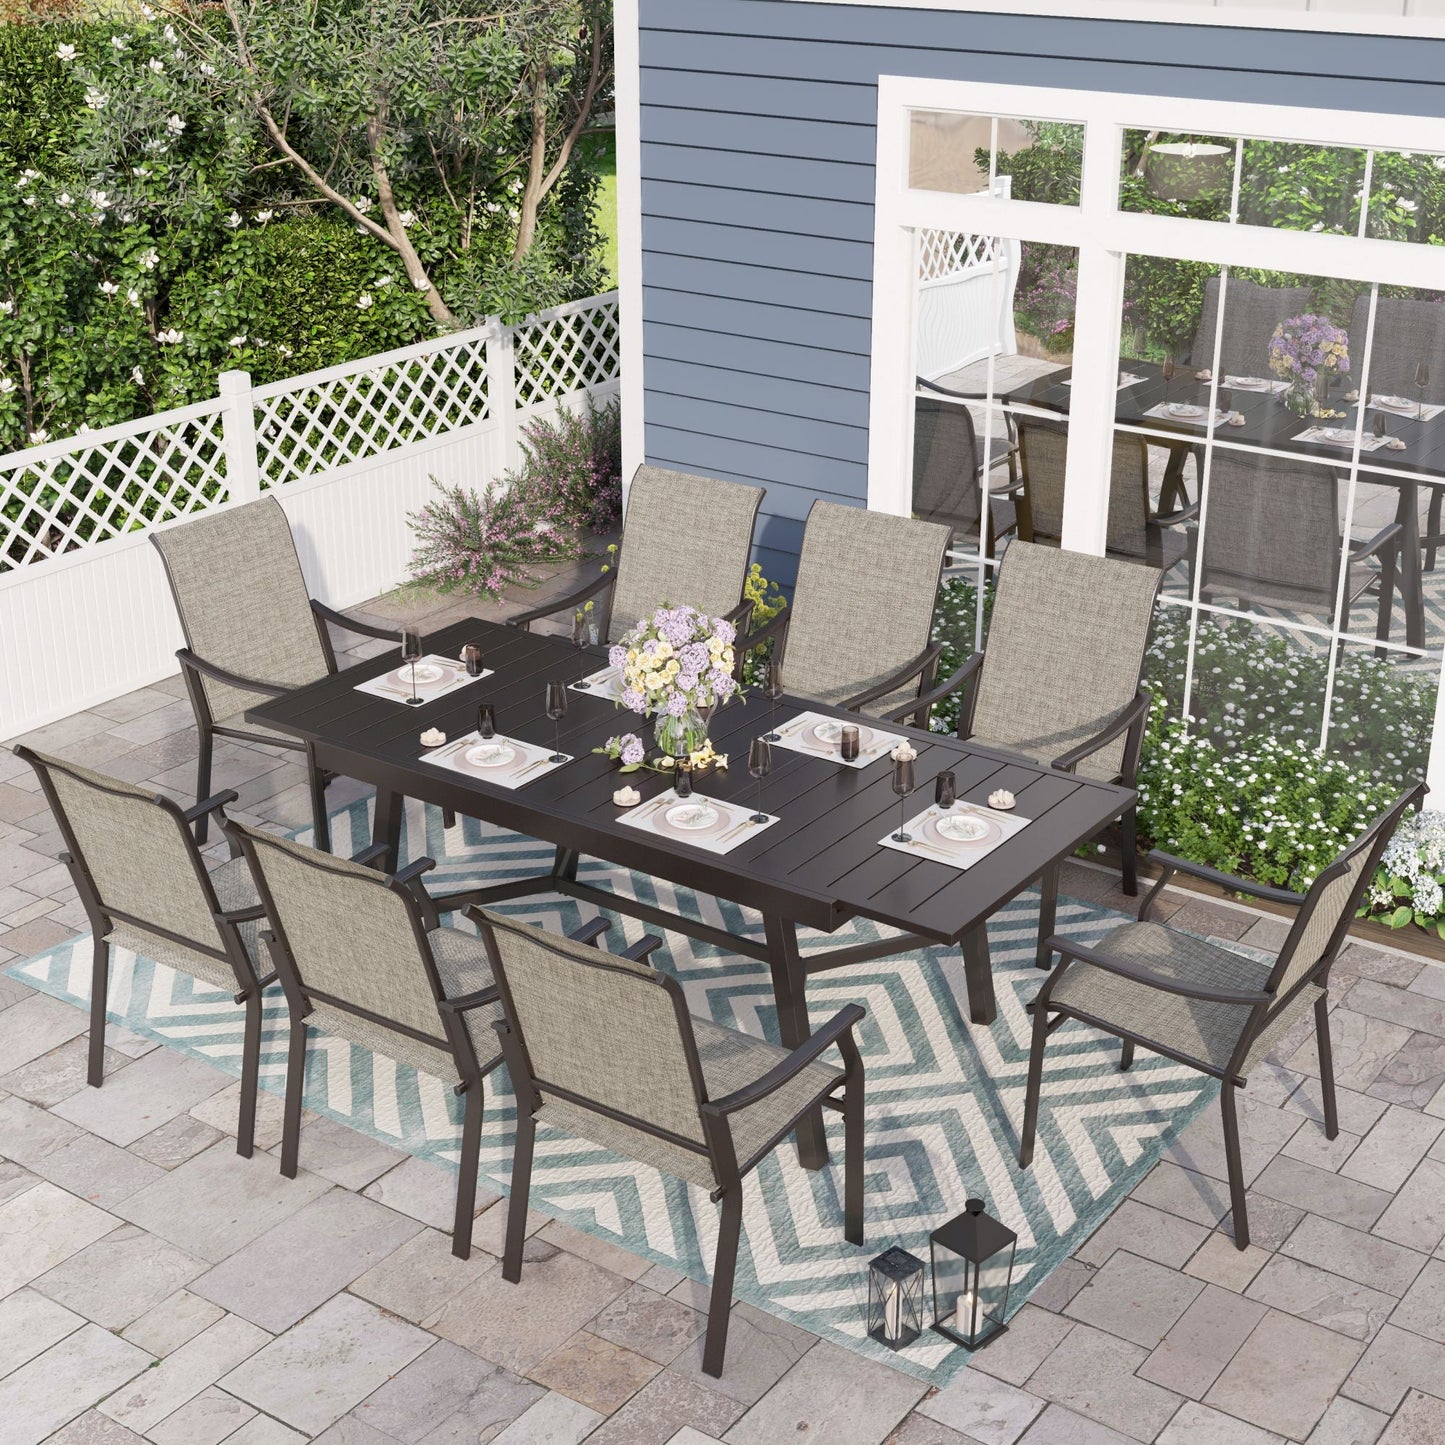 Sophia & William 9-Piece Outdoor Patio Dining Set with Textilene Chairs & Extendable Steel Table for 8